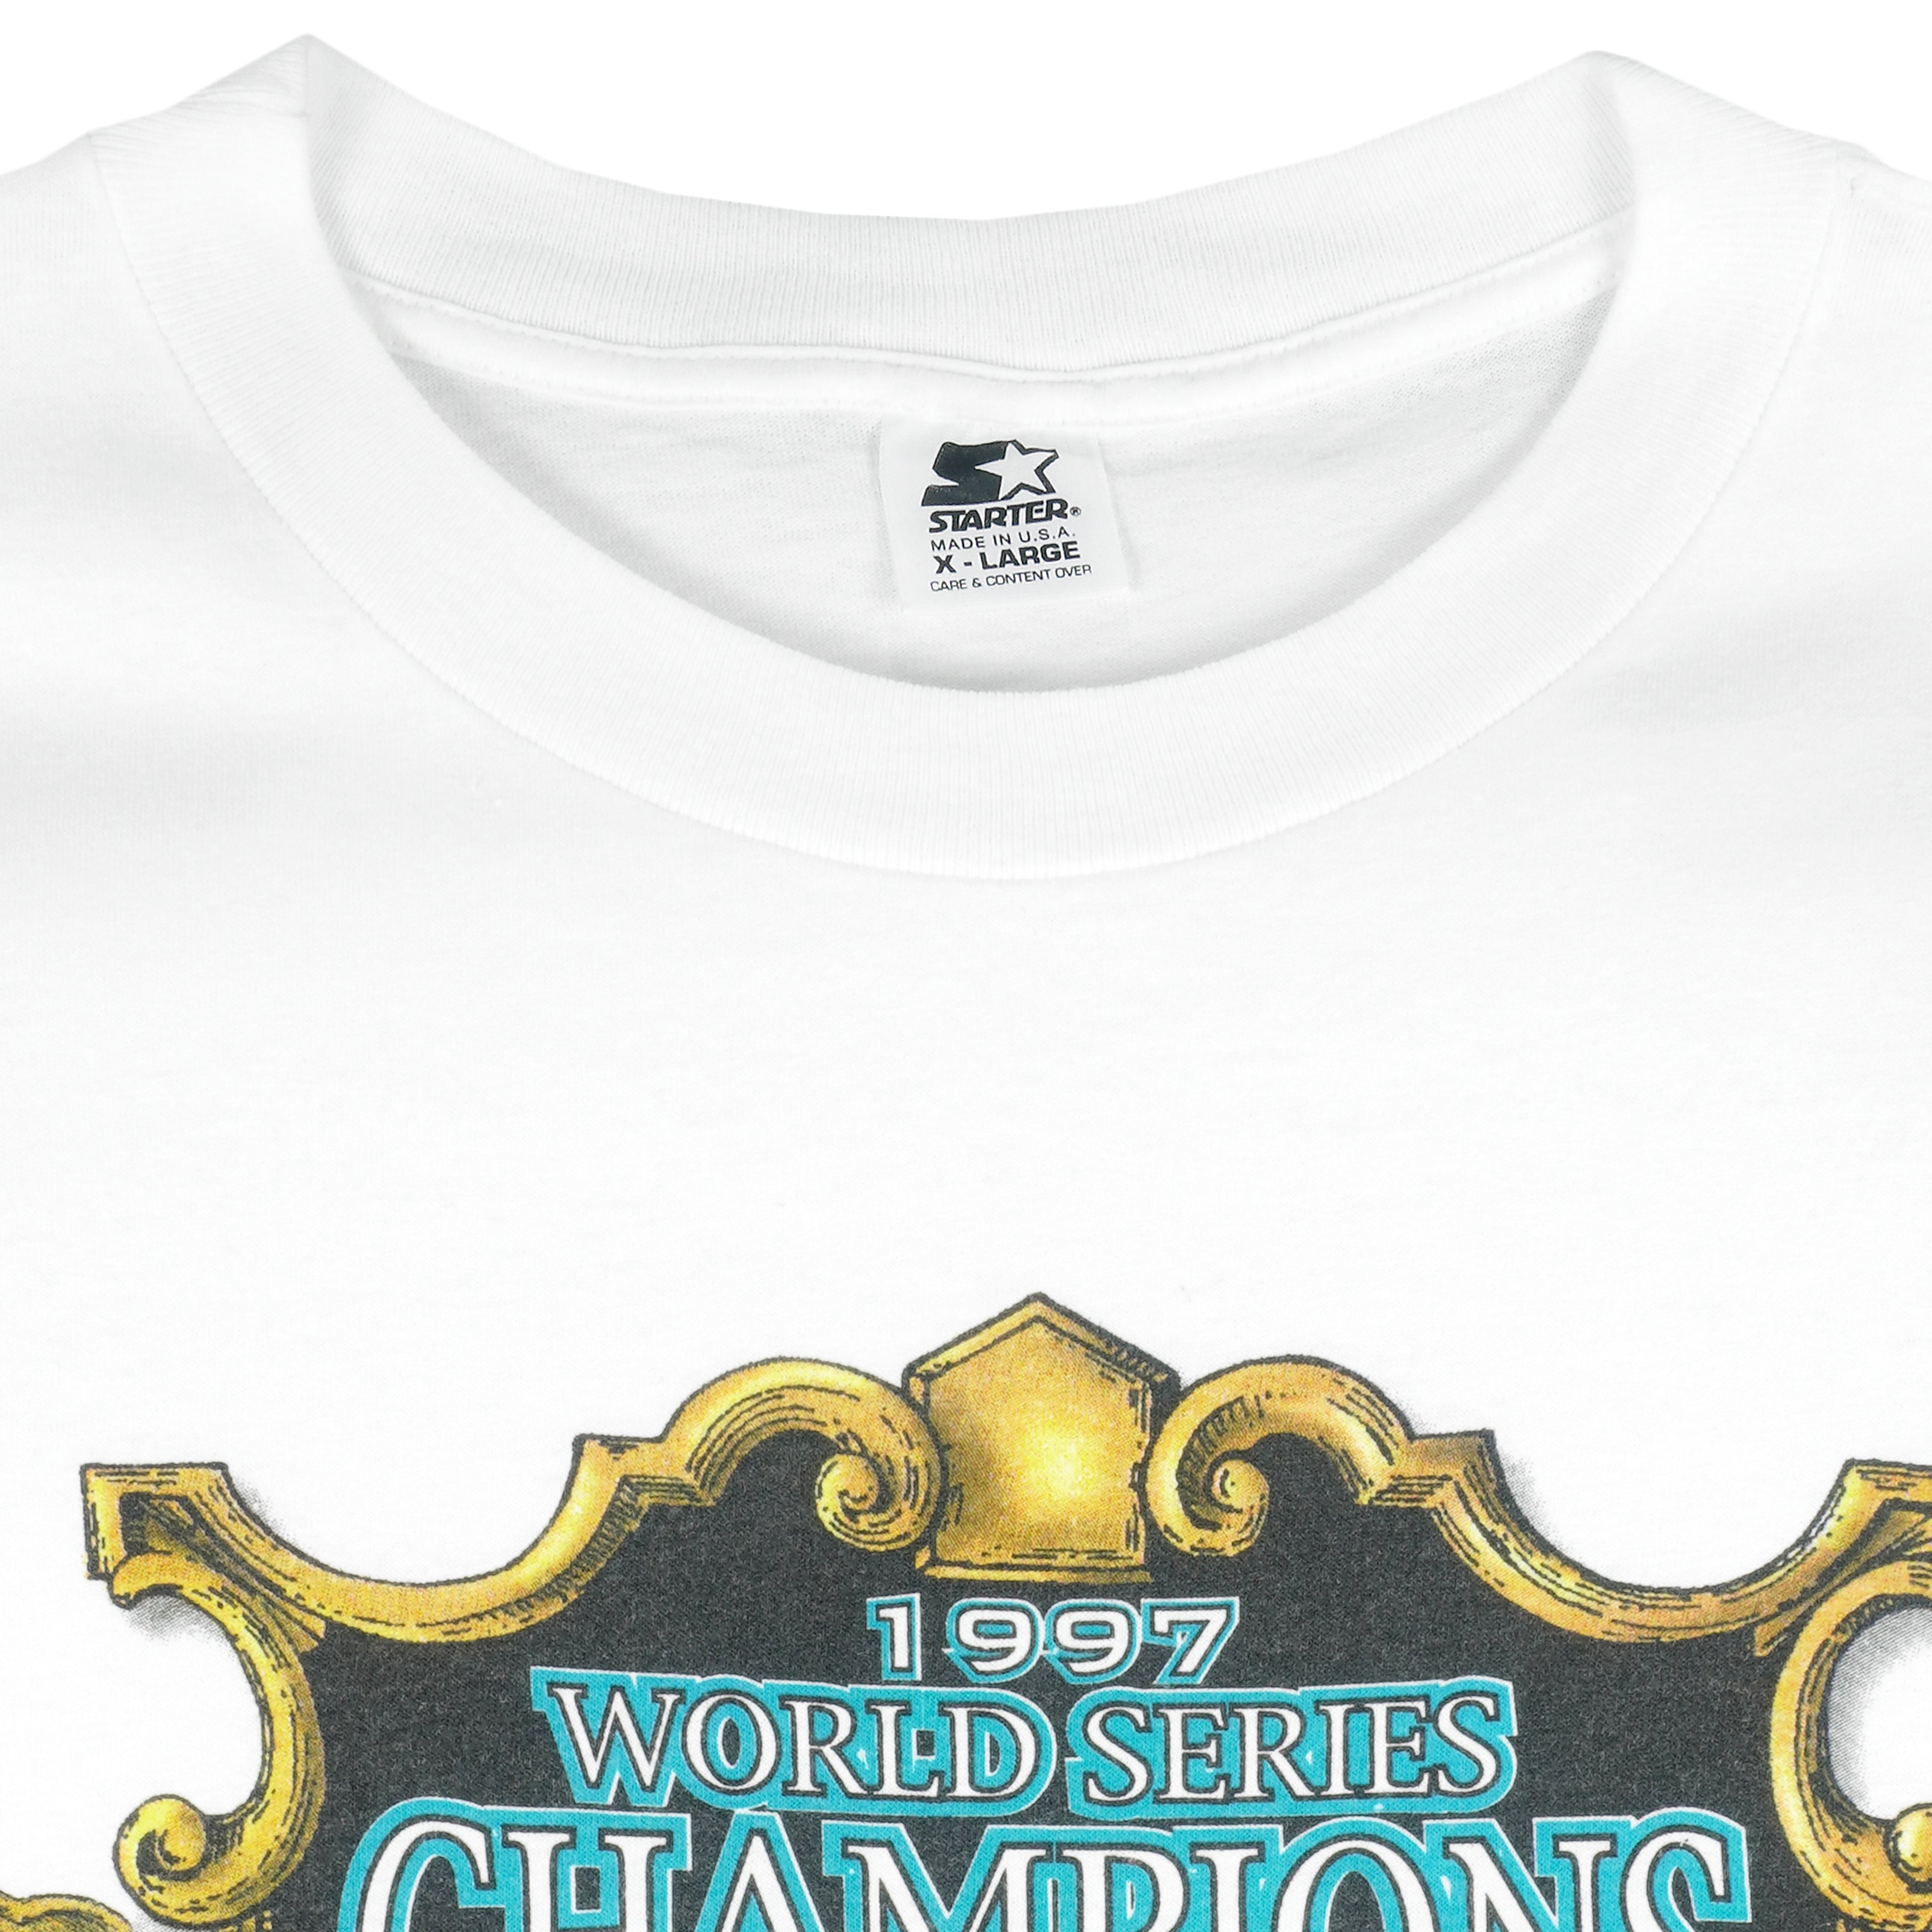 Florida Marlins World Series Champs Players Faces 1997 T-Shirt